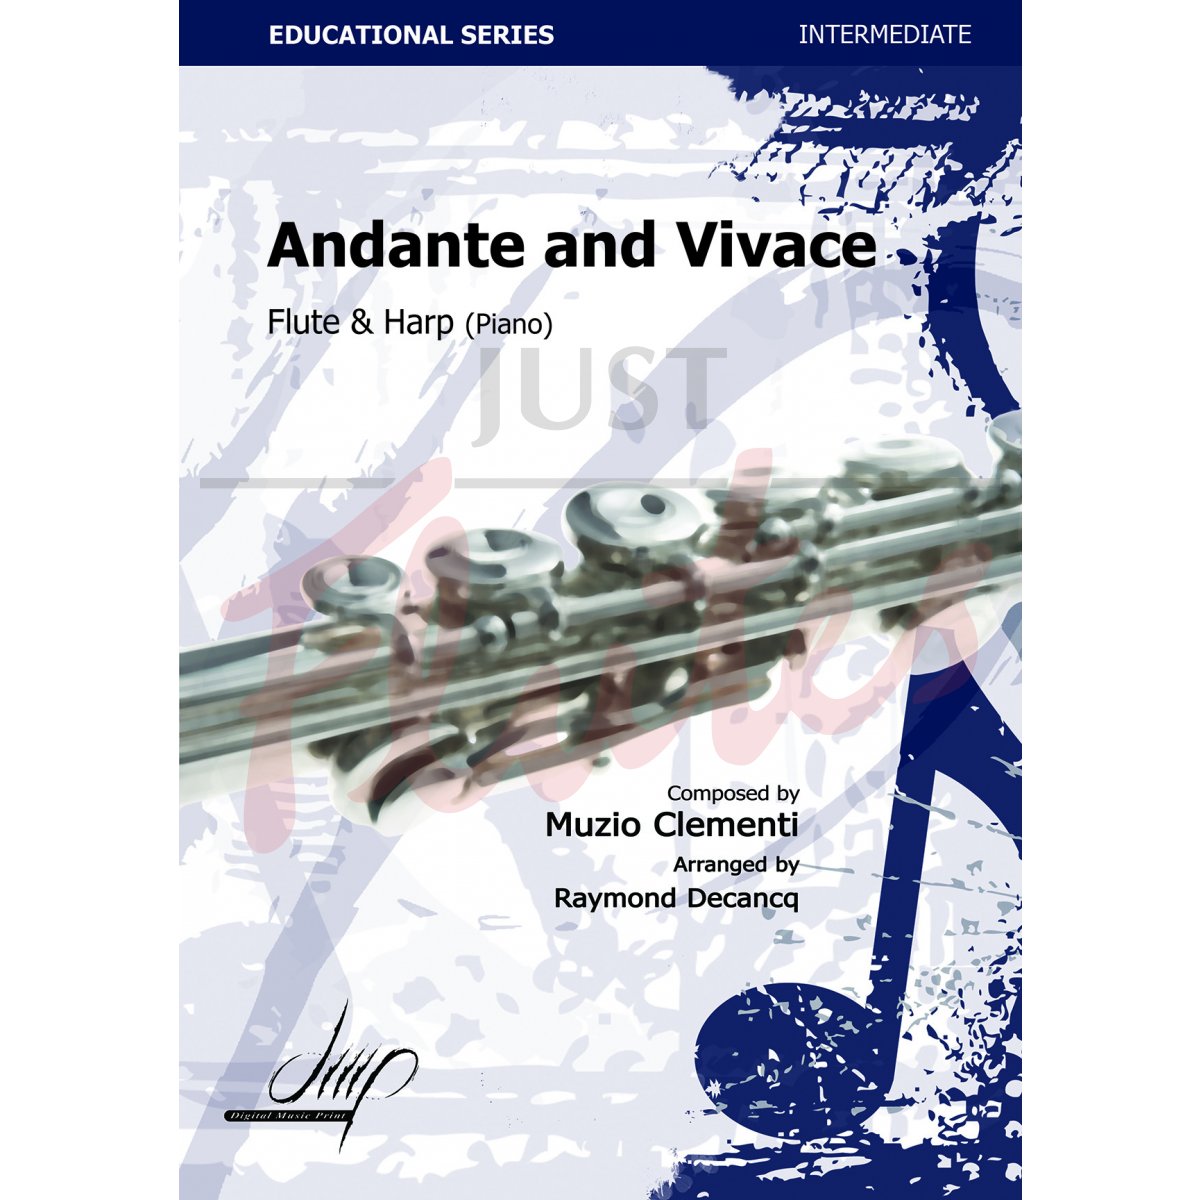 Andante and Vivace